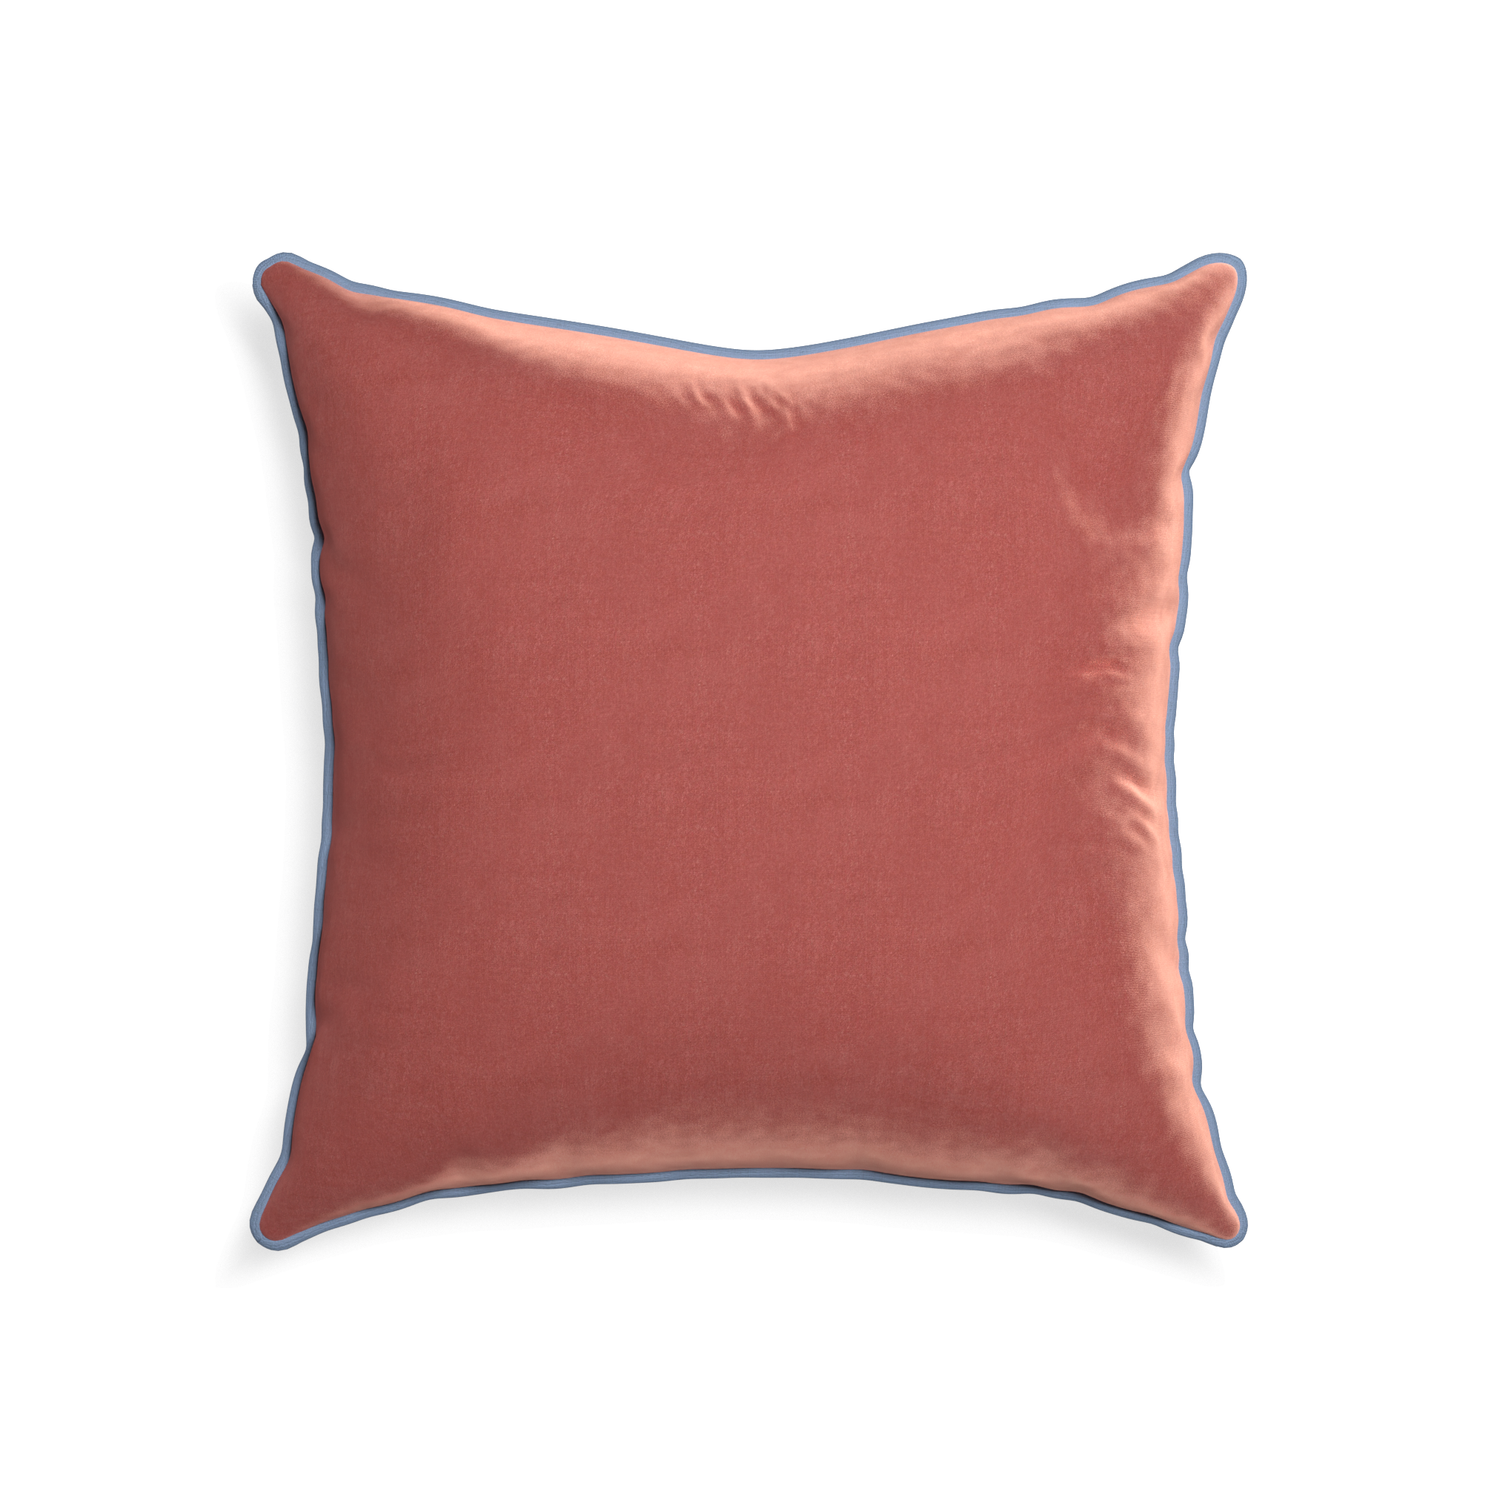 22-square cosmo velvet custom pillow with sky piping on white background